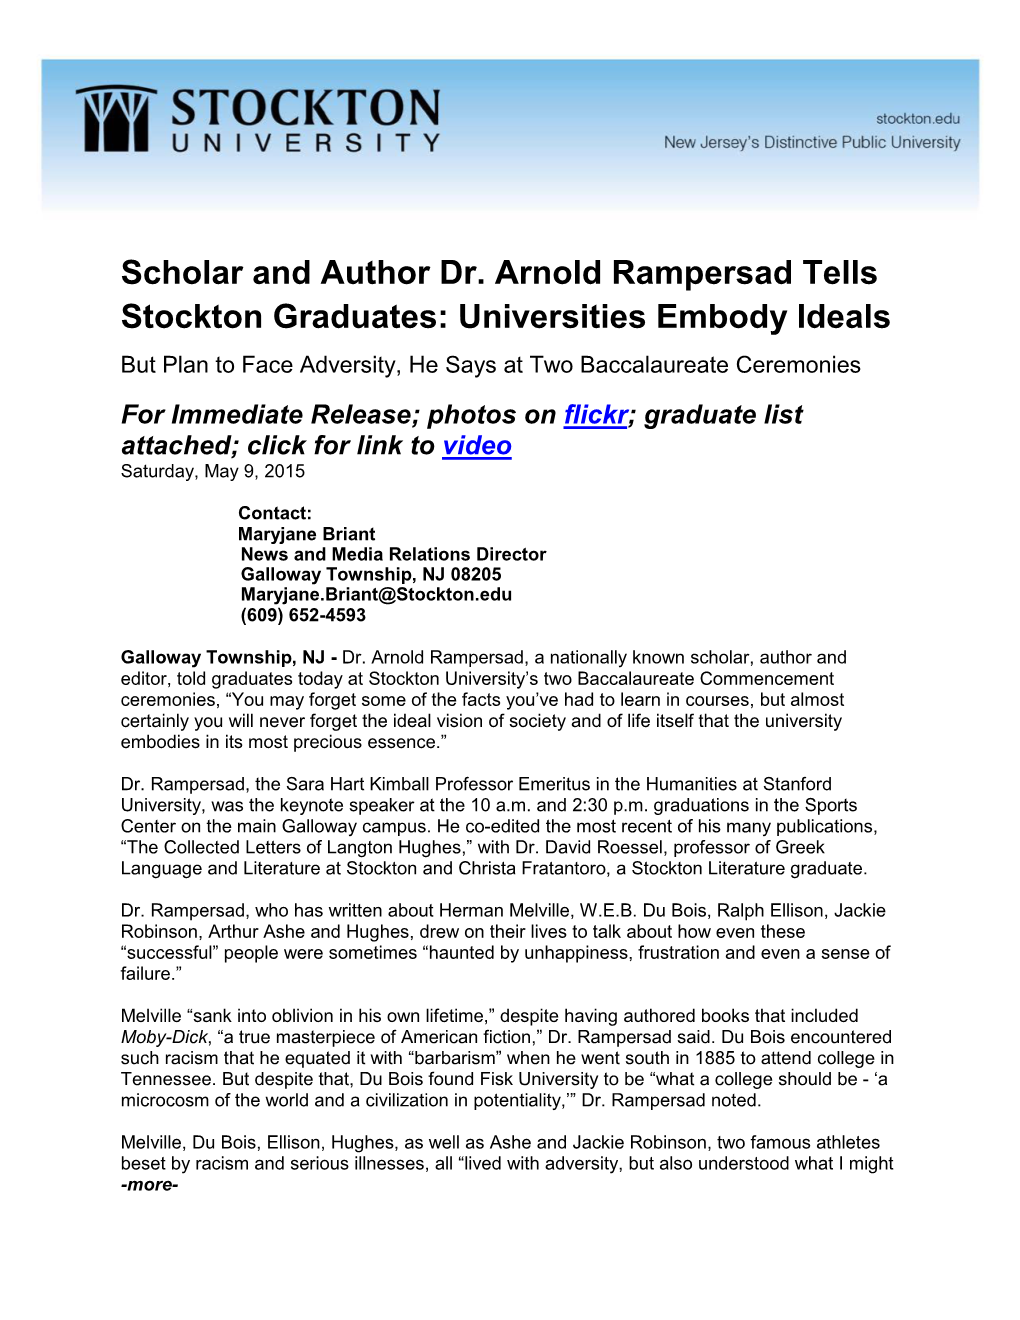 Scholar and Author Dr. Arnold Rampersad Tells Stockton Graduates: Universities Embody Ideals but Plan to Face Adversity, He Says at Two Baccalaureate Ceremonies